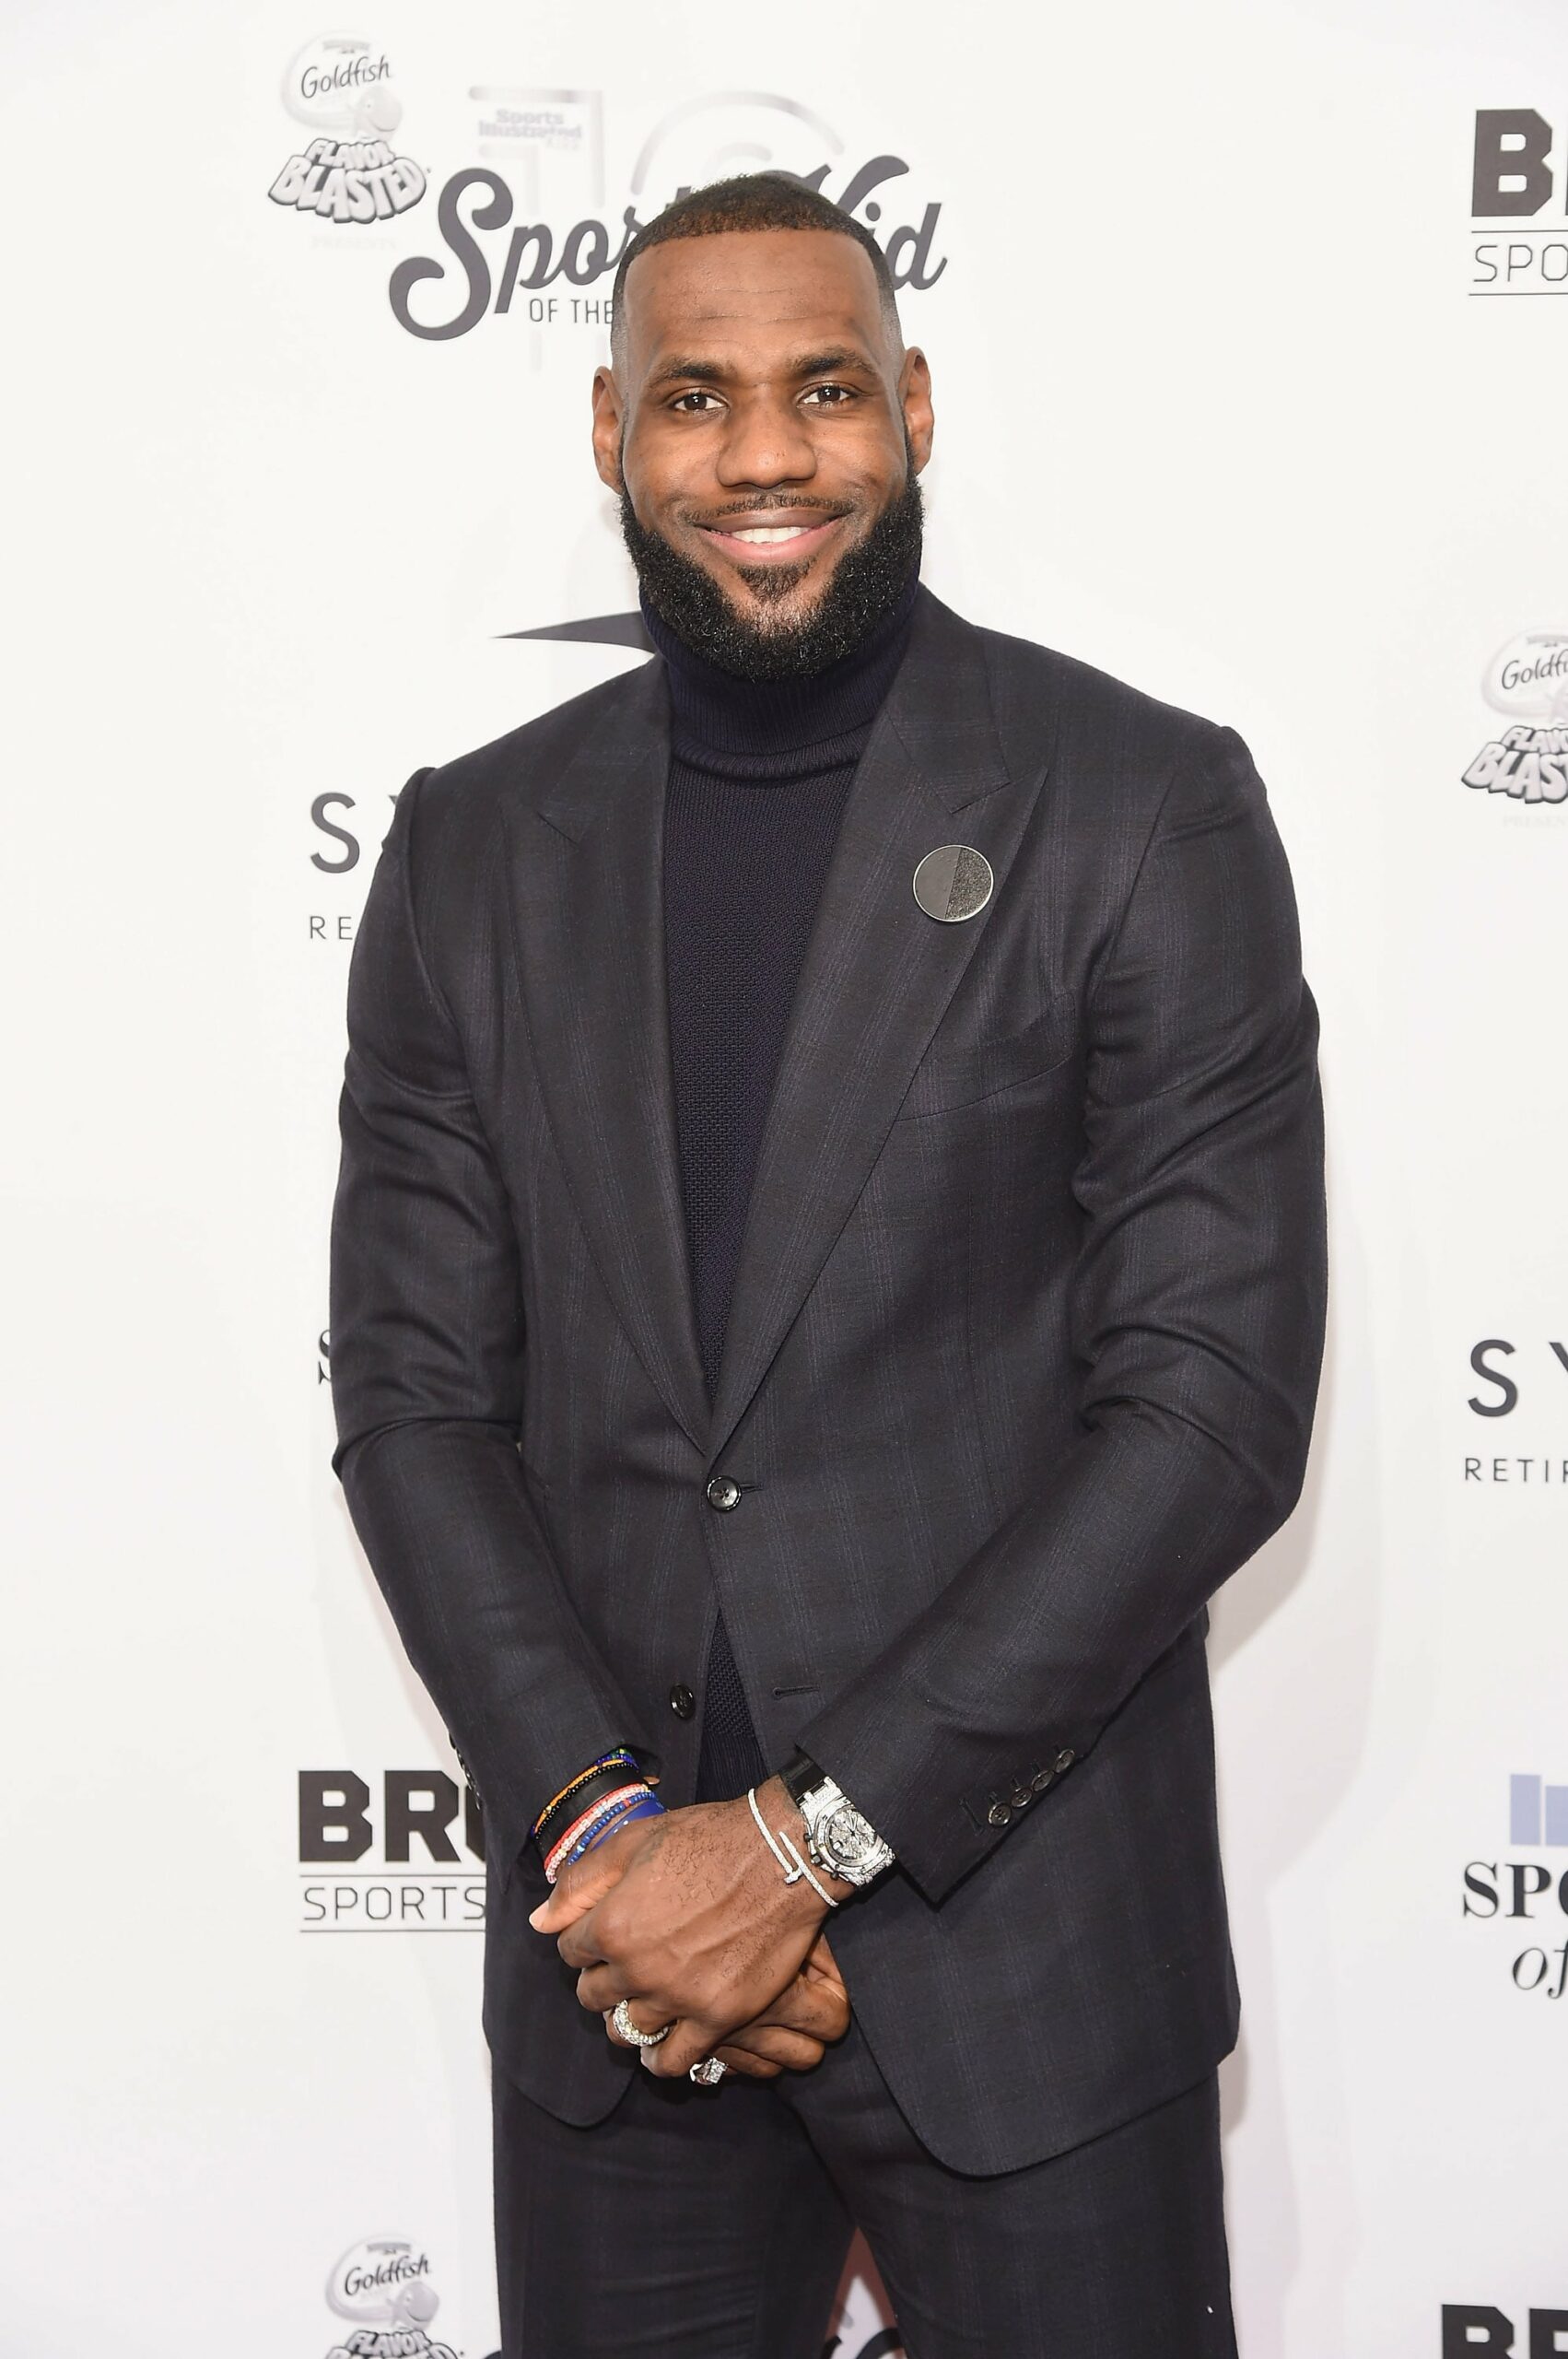 NEW YORK, NY - DECEMBER 12: Event honoree LeBron James attends the 2016 Sports Illustrated Sportsperson of the Year at Barclays Center of Brooklyn on December 12, 2016 in the Brooklyn borough of New York City.  (Photo by Gary Gershoff/WireImage)